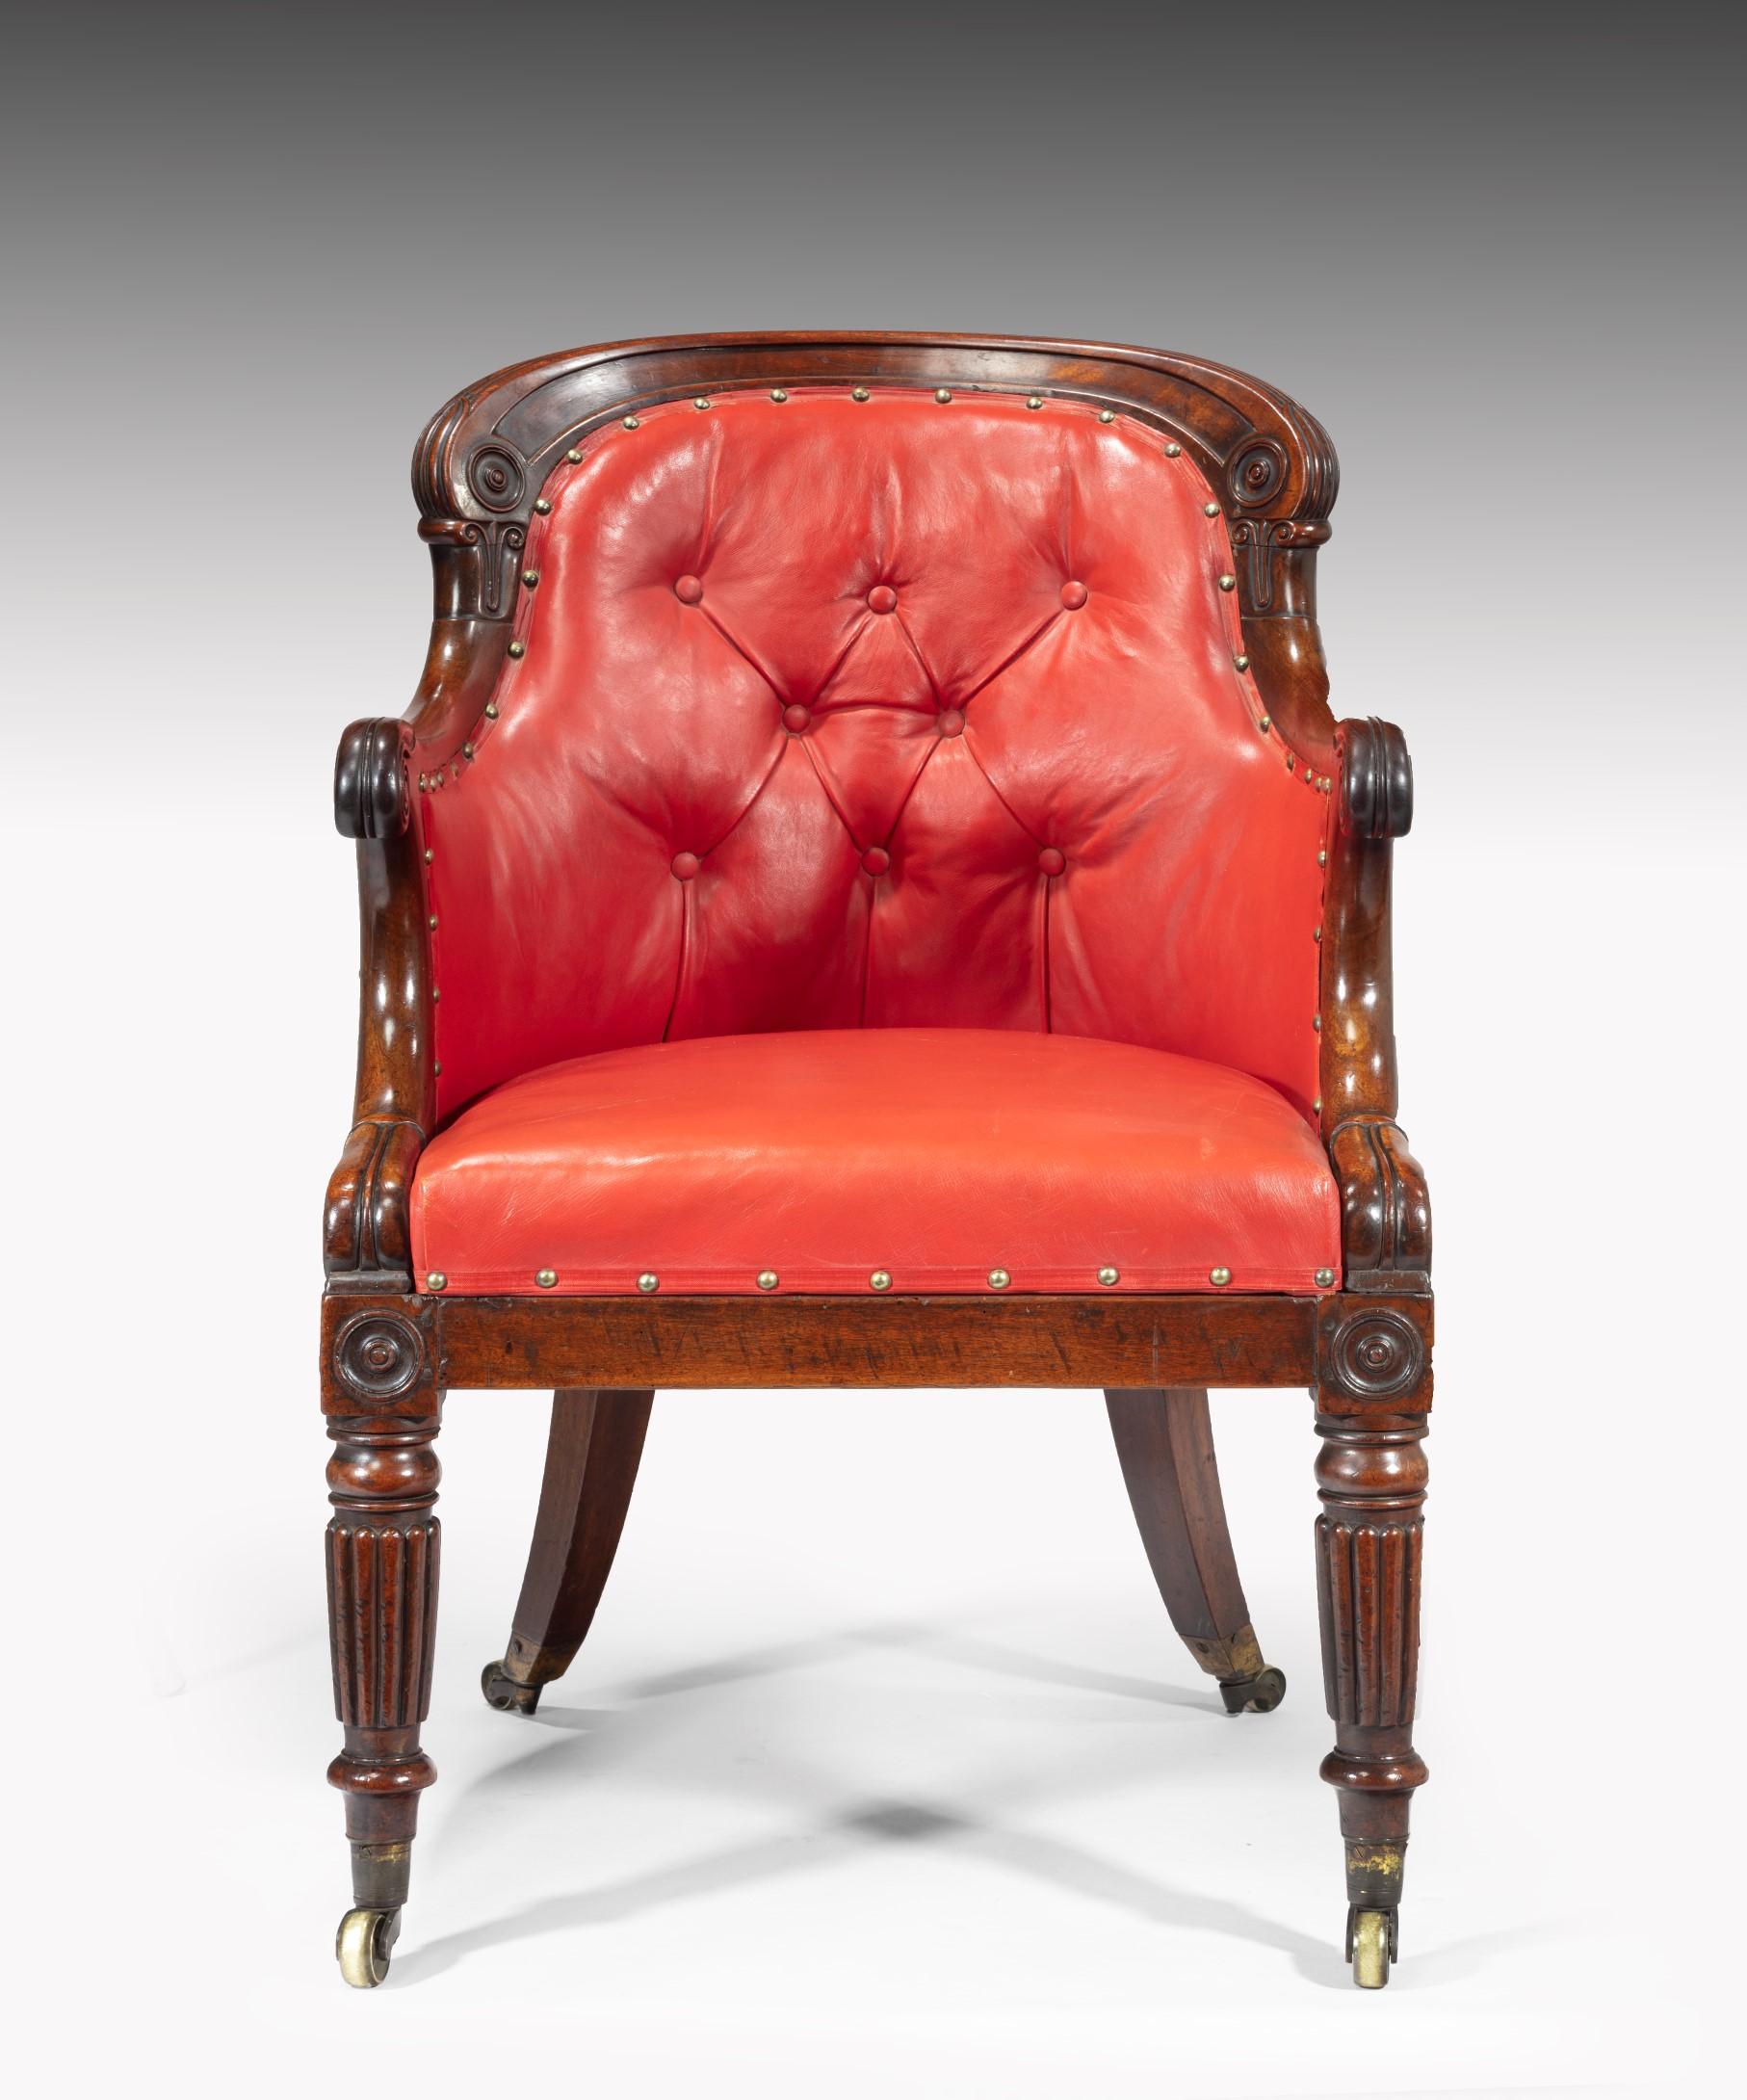 A superb Regency period mahogany desk armchair upholstered in red leather, the armchair's mahogany show-wood frame carved crisply carved with lotus leaves to the arms and raised on turned and reeded legs which terminate in the original brass cap